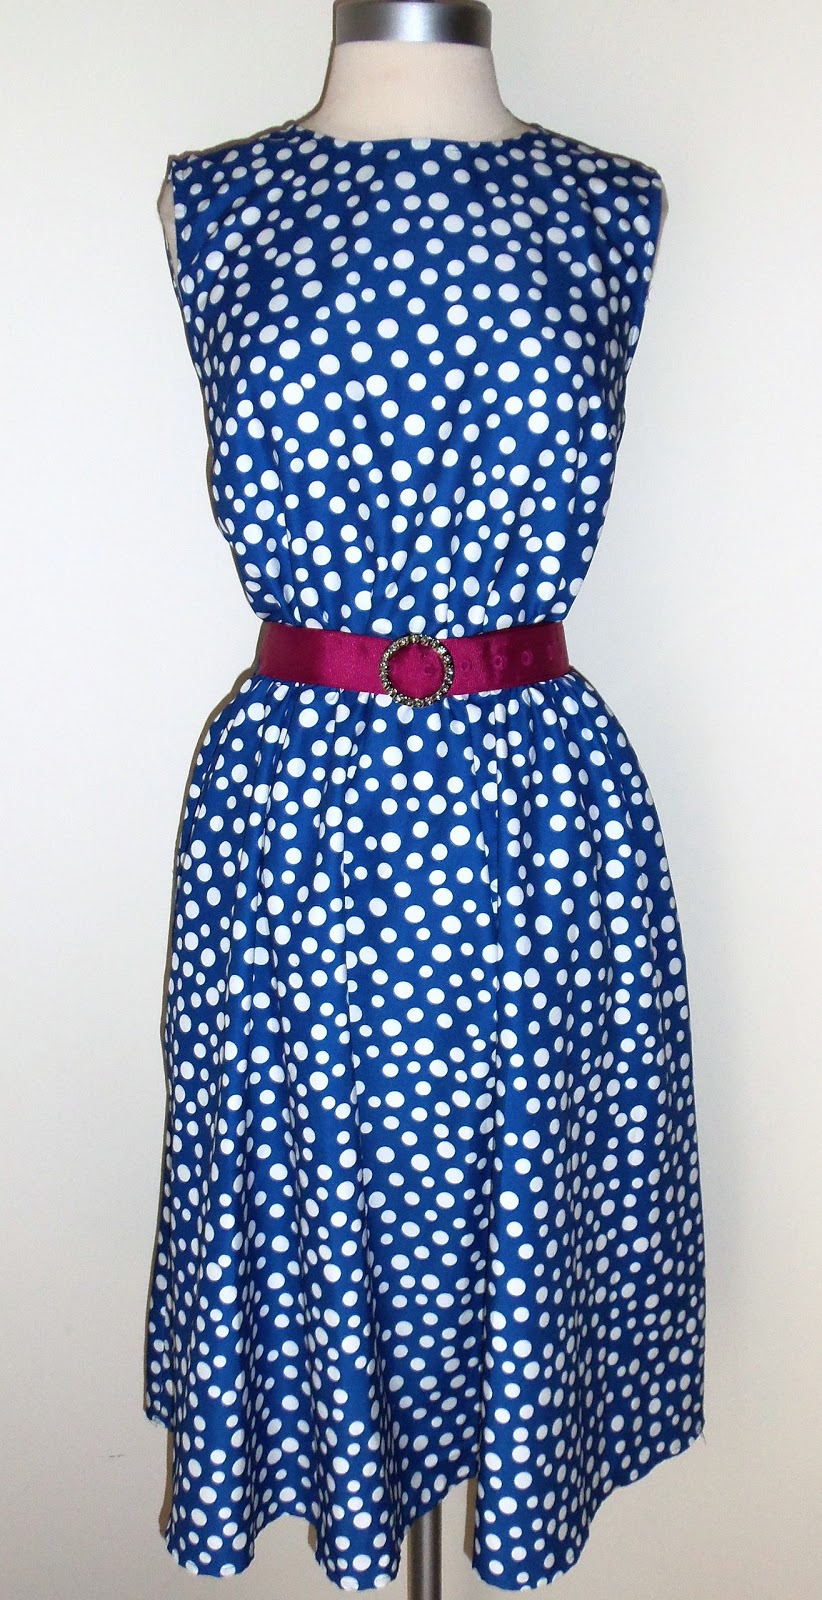 Thrifty Chic Shop: Signature Collection by Vicki Wayne Blue Polka Dot ...